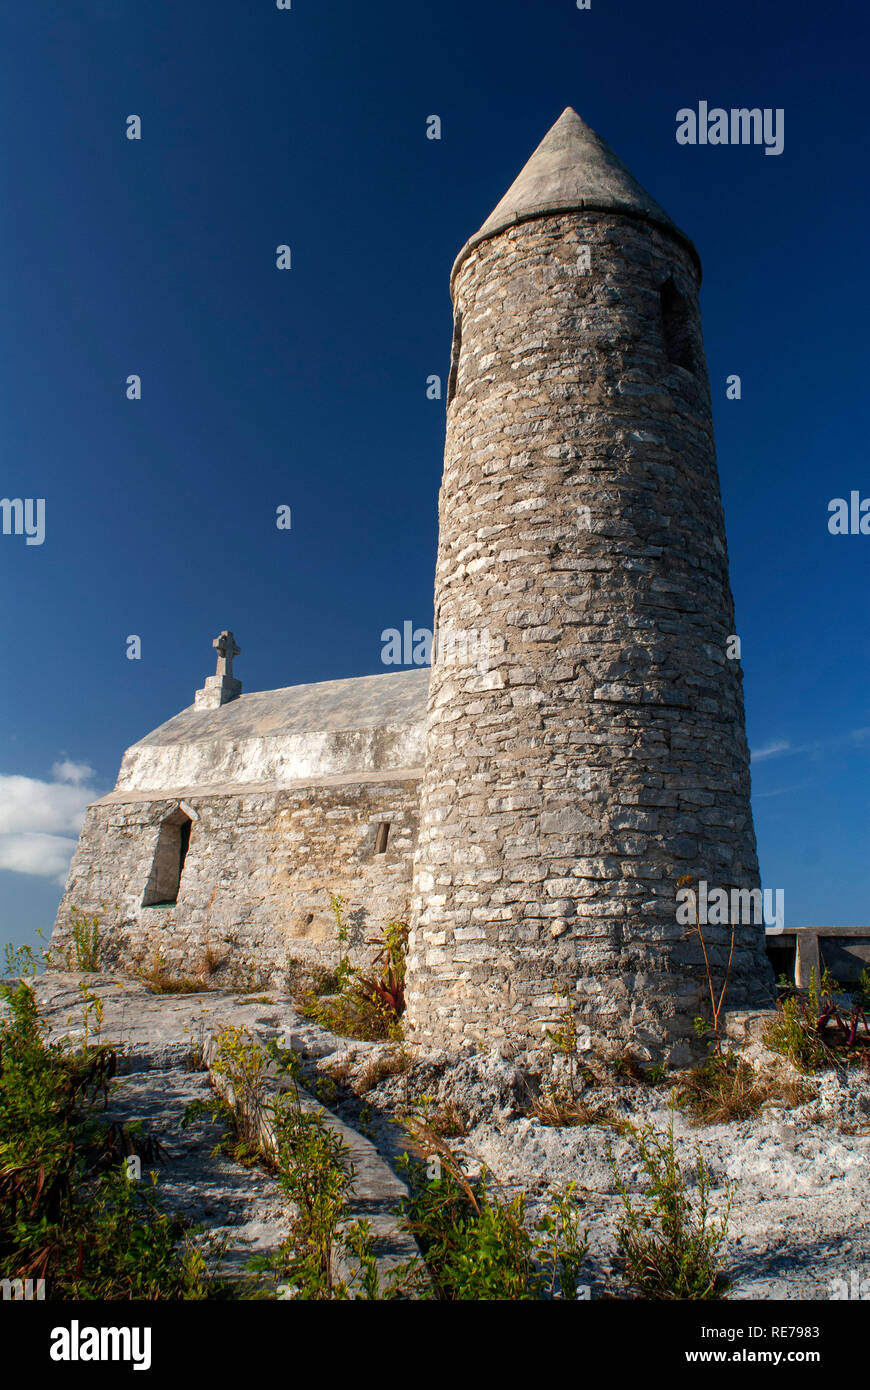 The Ermite small monastery at the top of Mount Alvernia on Cat island, over 63 meters, Bahamas. Mt. Alvernia Hermitage and Father Jerome's tomb atop C Stock Photo